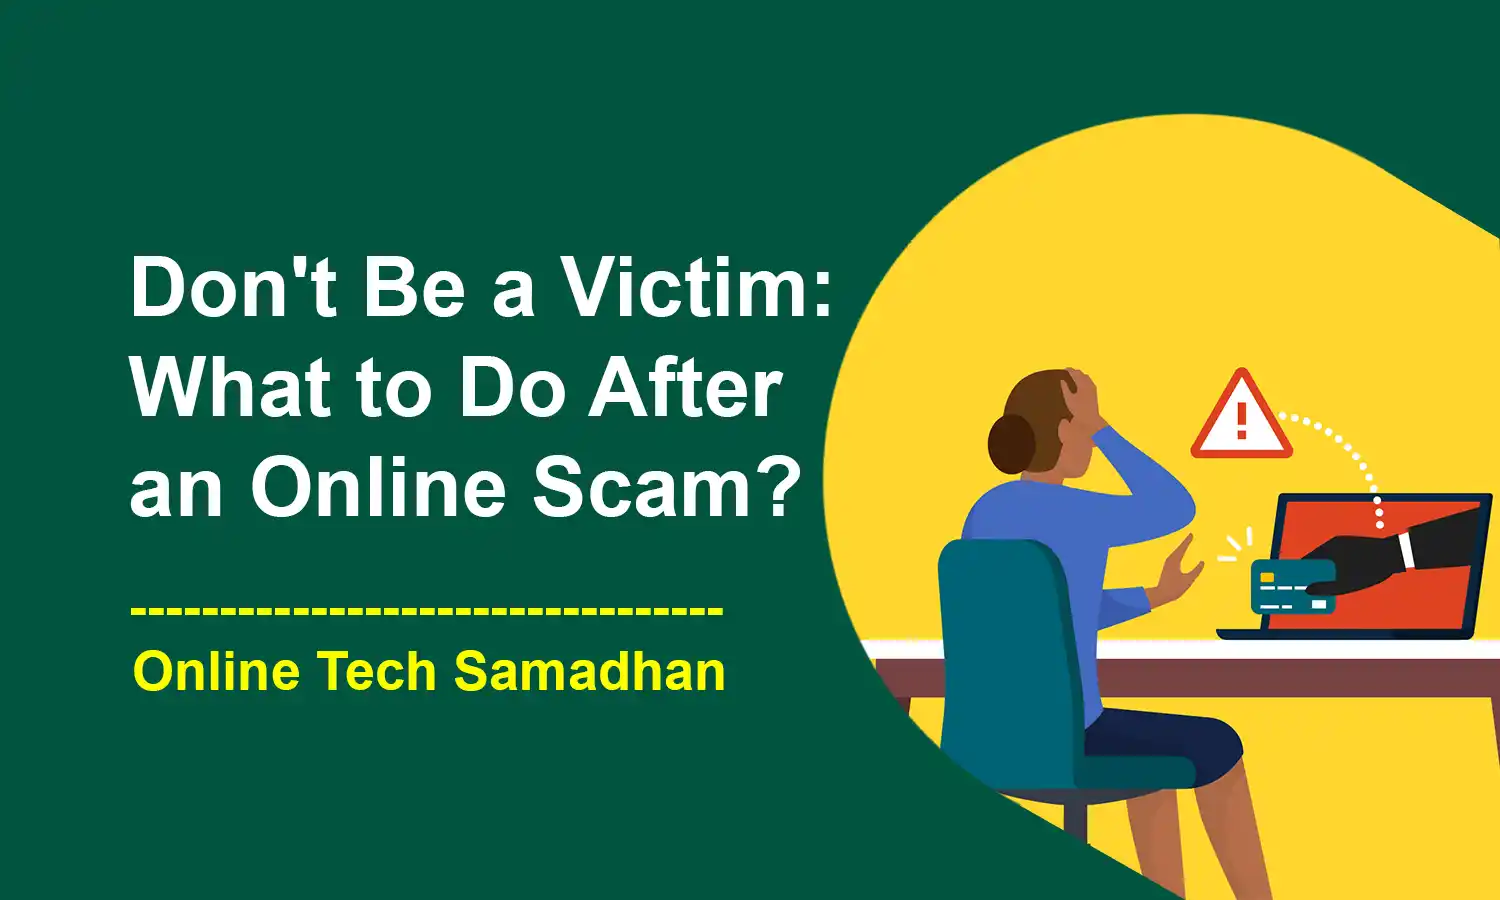 What to Do After an Online Scam